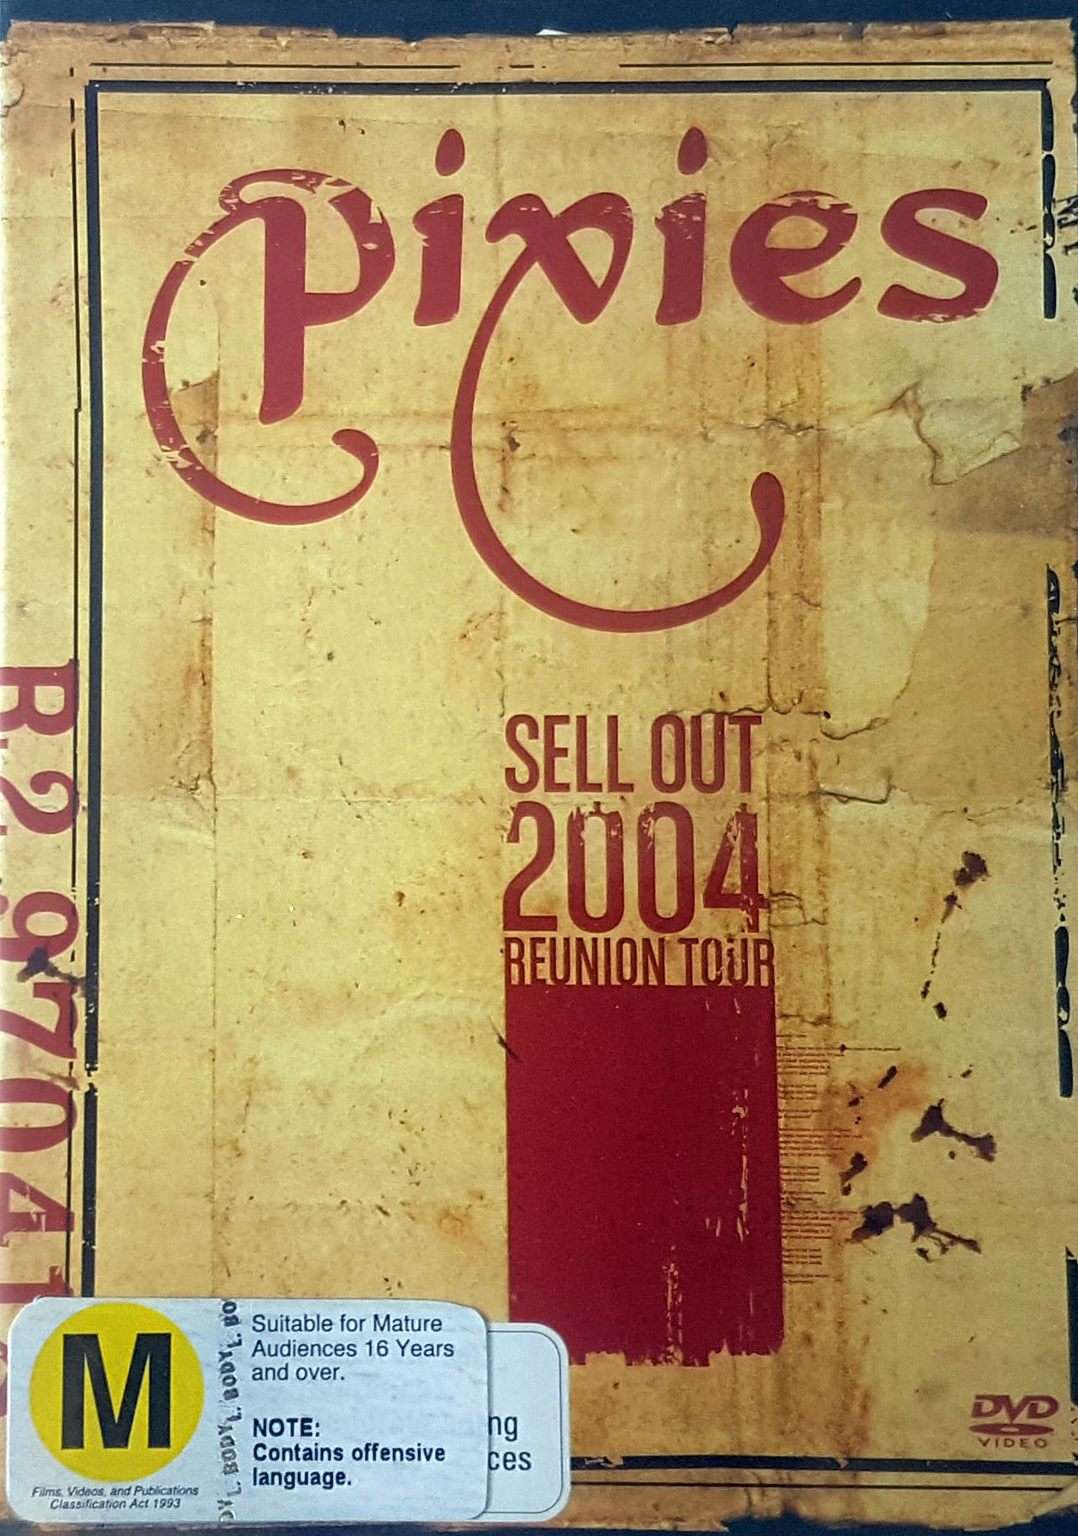 Pixies Sell Out 2004 Reunion Tour